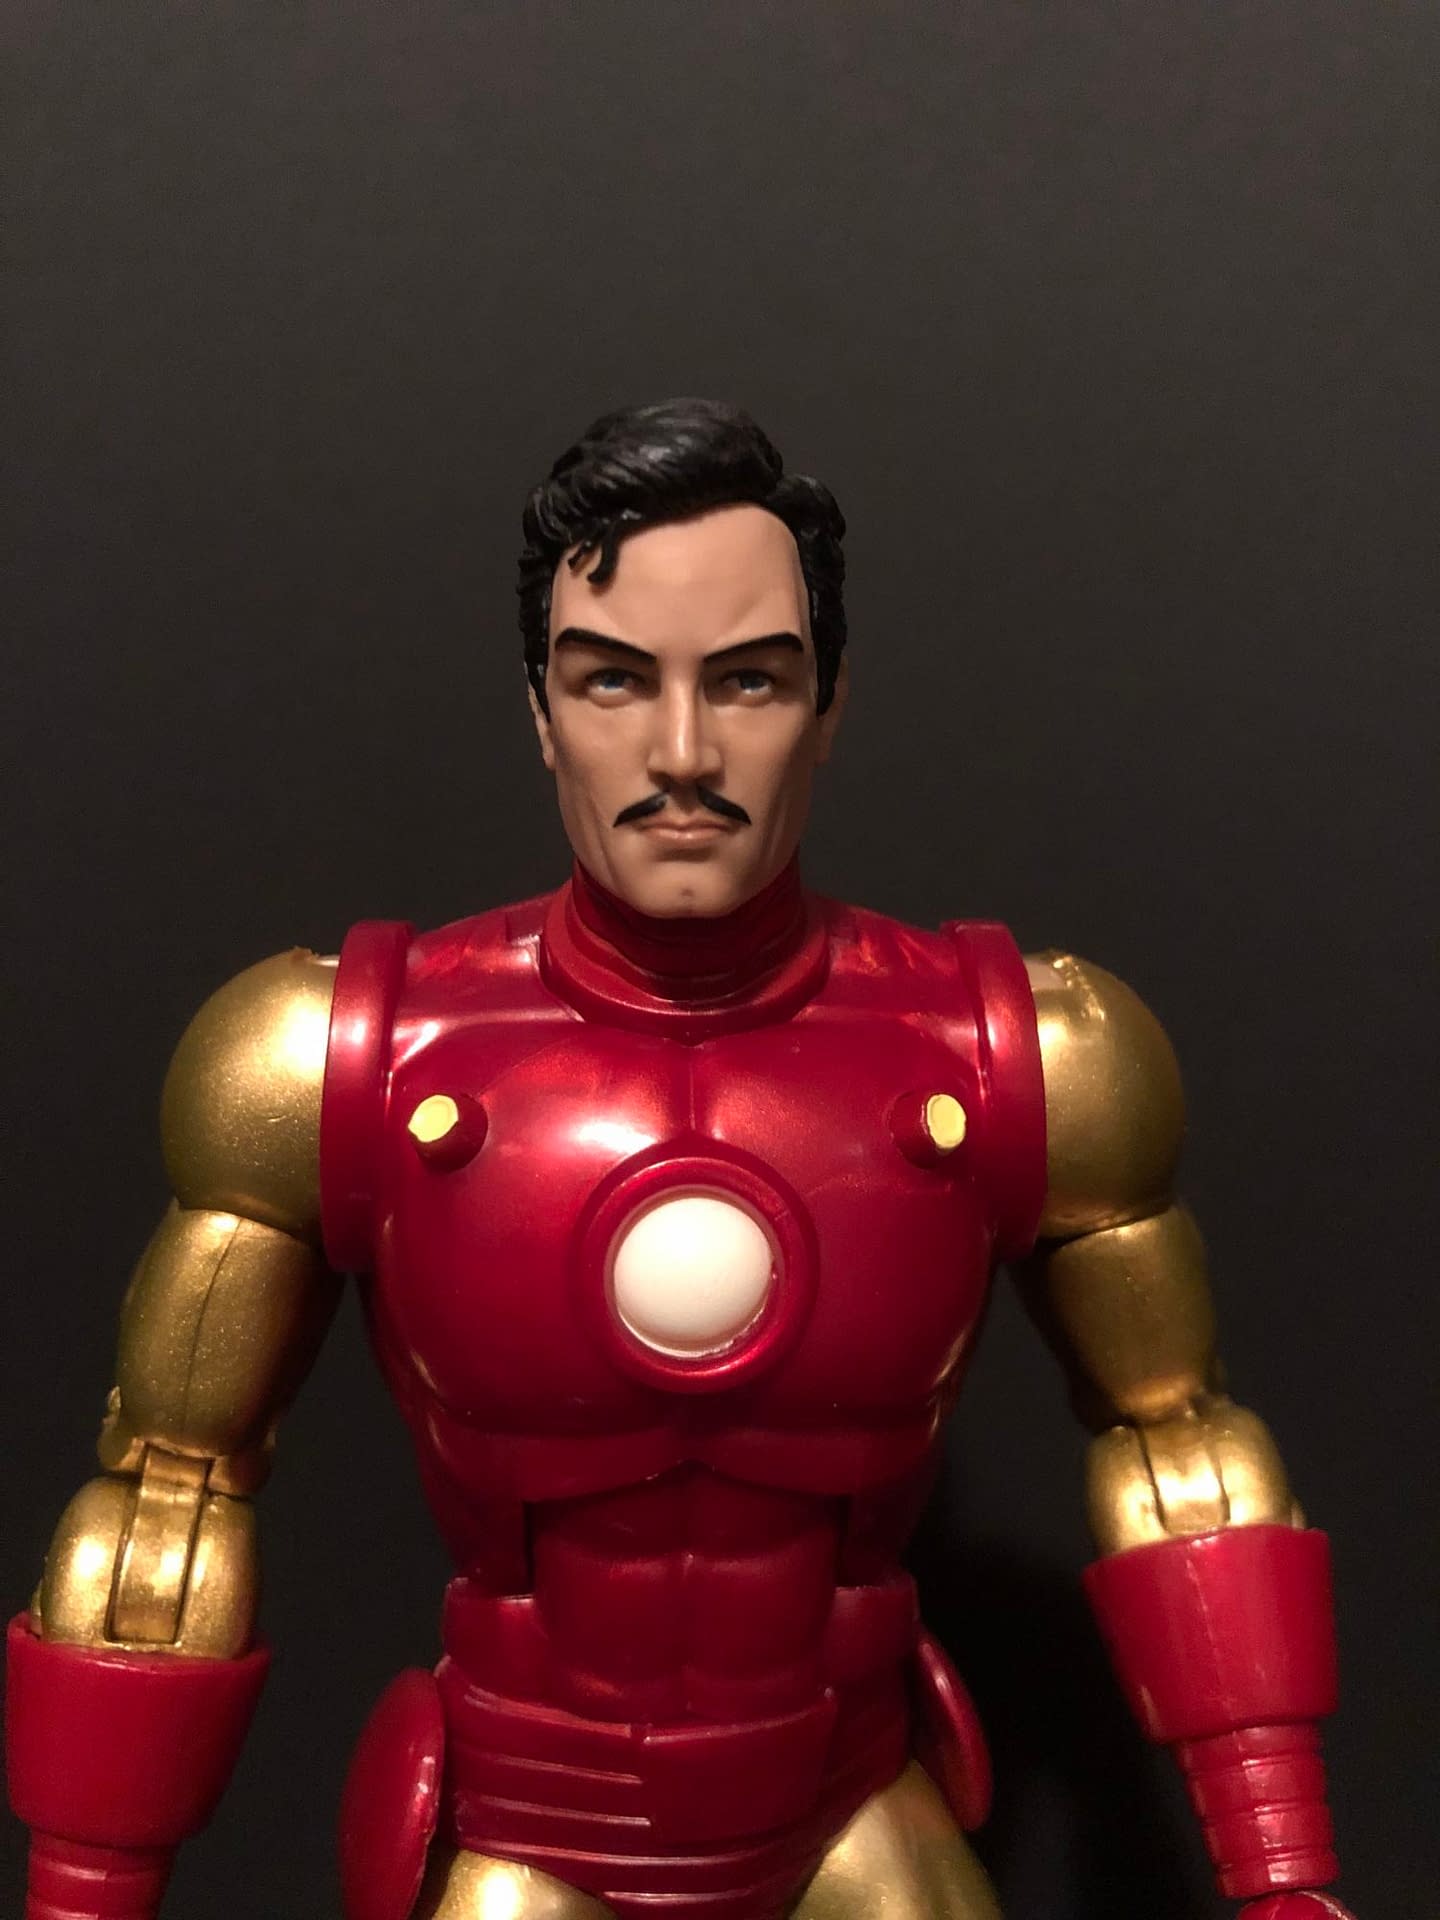 Marvel's 80th Anniversary Iron Man Marvel Legends Figure [Review]